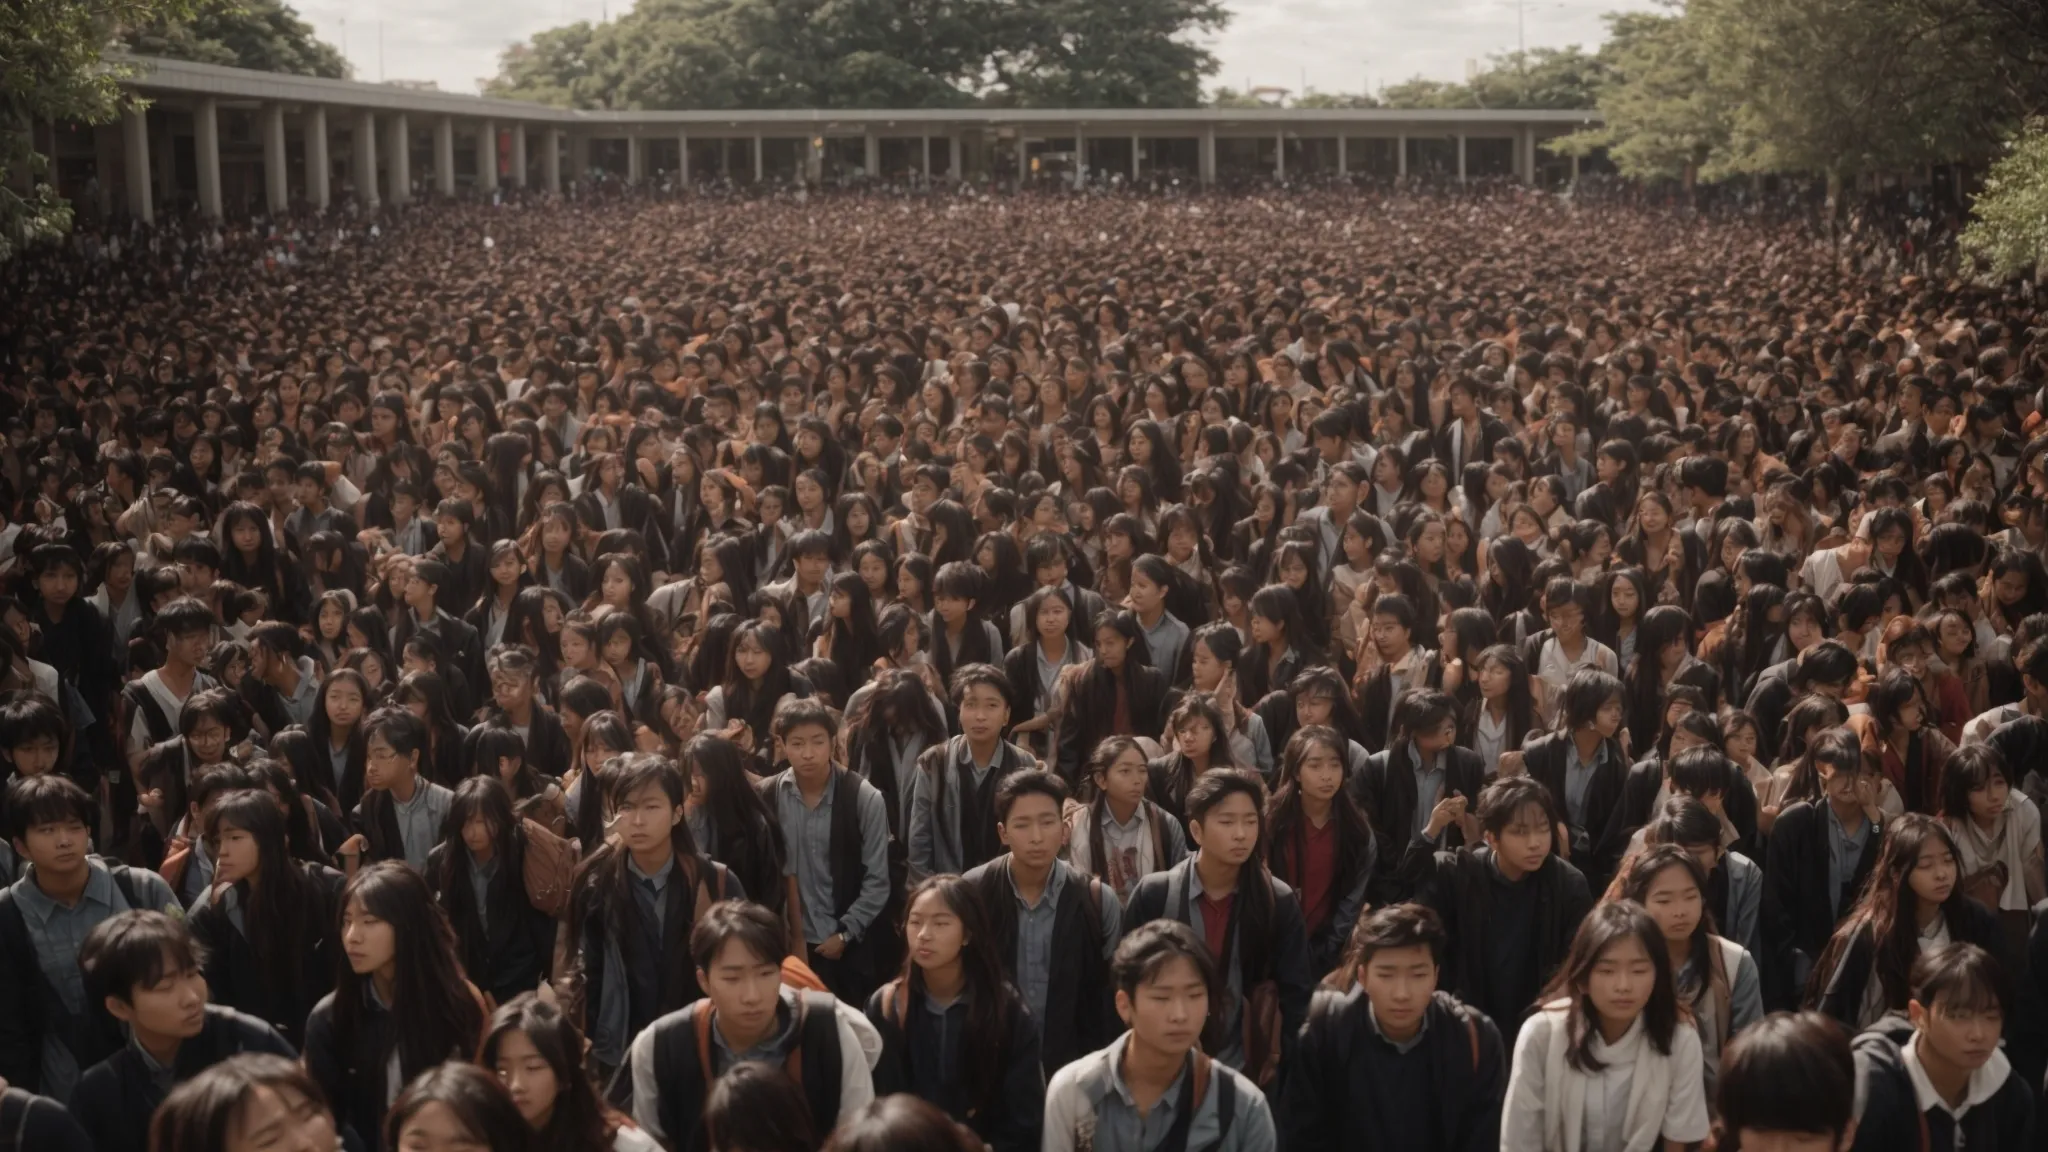 a sea of students gathered in a university courtyard, their faces animated with fervor under a clear sky.